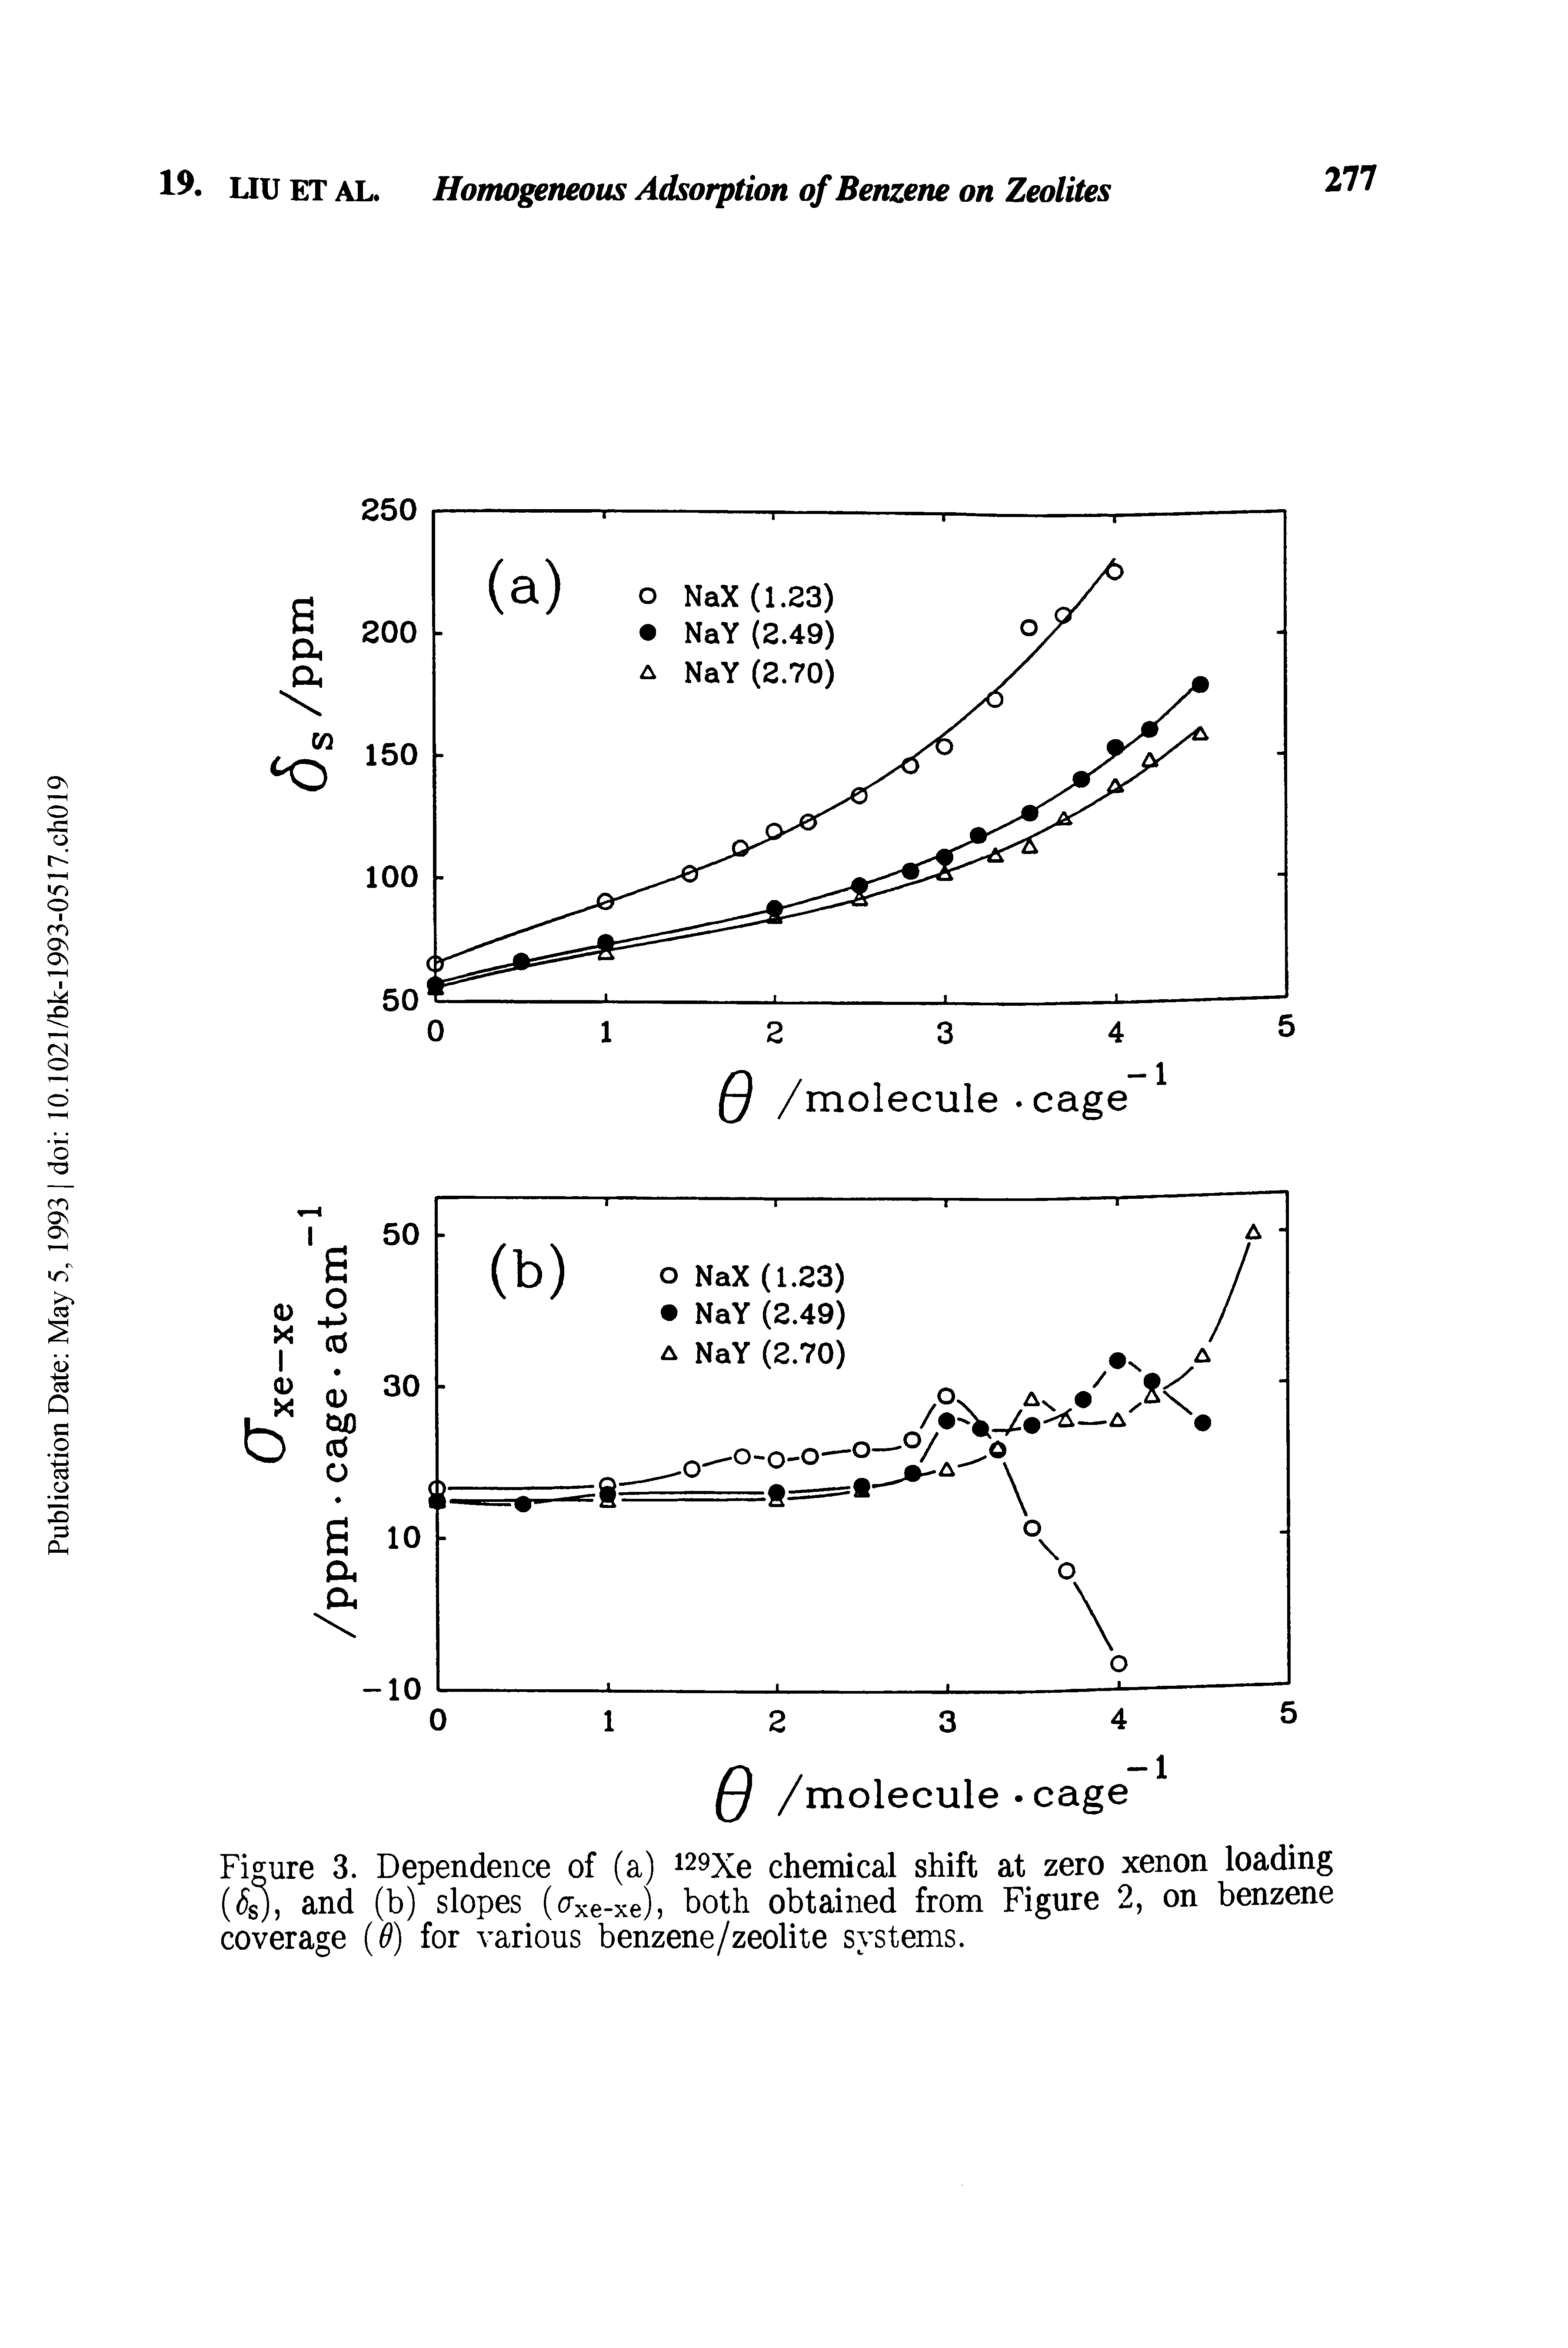 Figure 3. Dependence of (a) 129Xe chemical shift at zero xenon loading (<5SJ, and (b) slopes (<rxe xe), both obtained from Figure 2, on benzene coverage (6) for various benzene/zeolite systems.